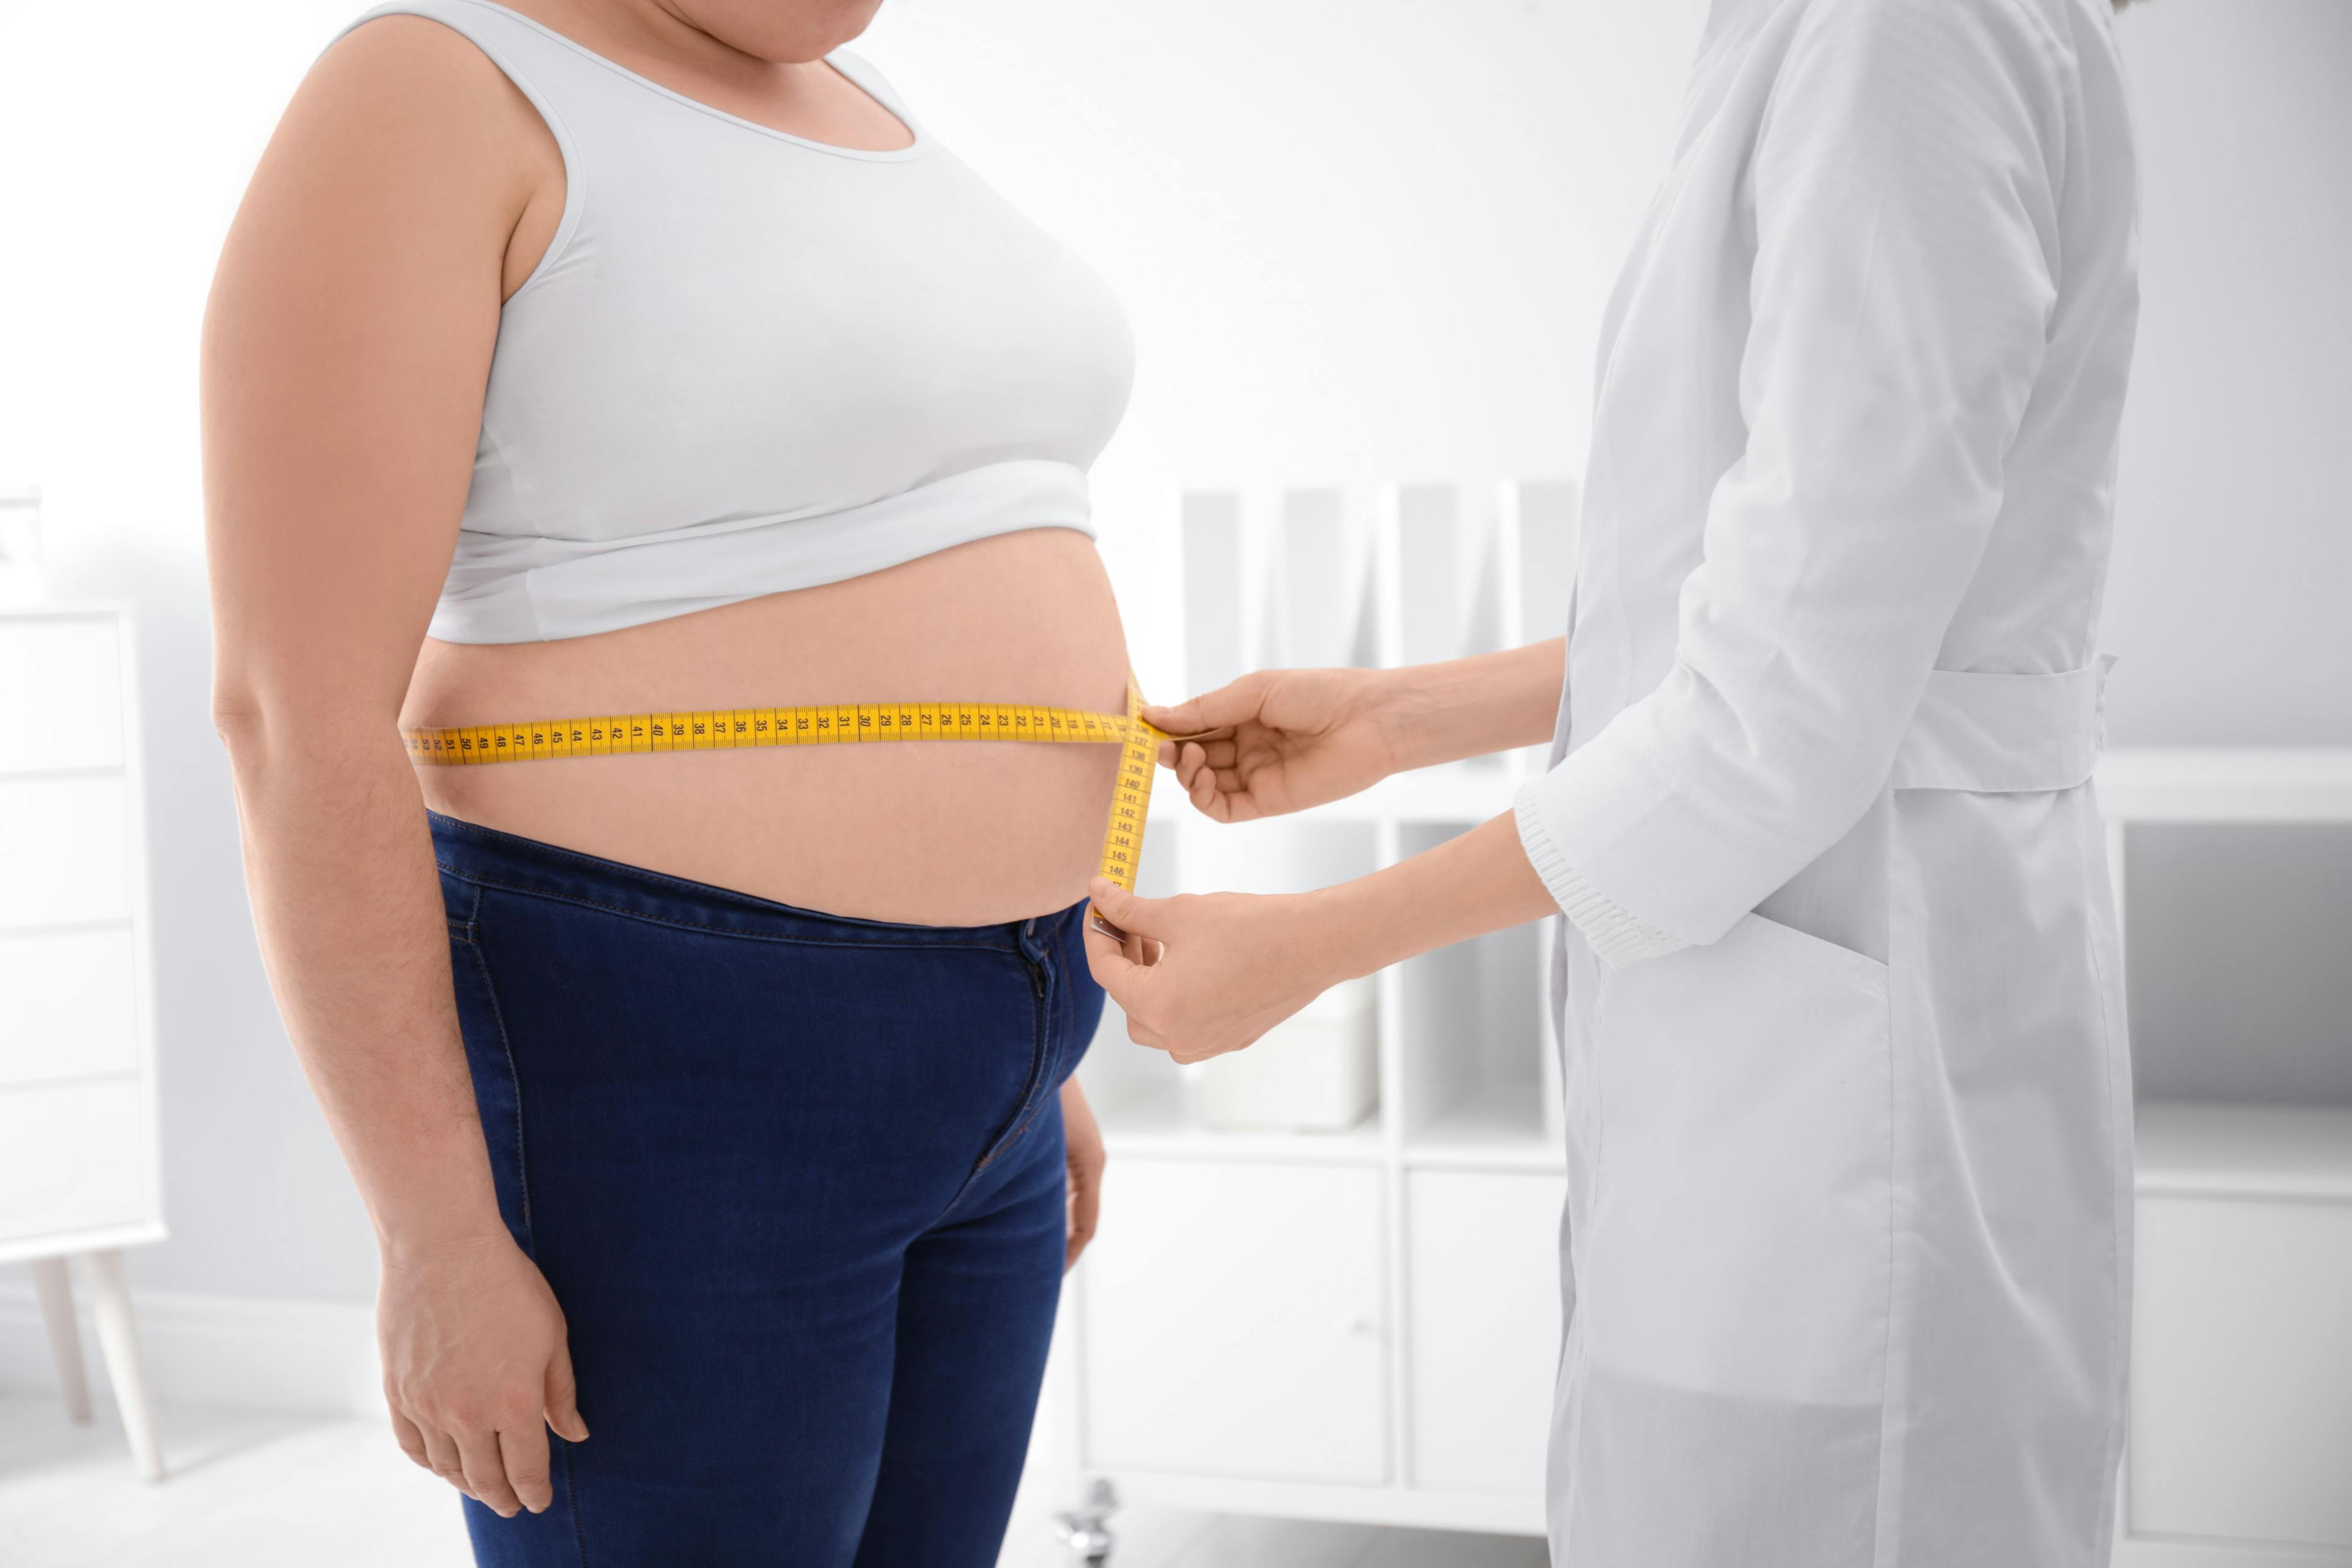 Obesity Overview: 7 Questions on the Latest Research